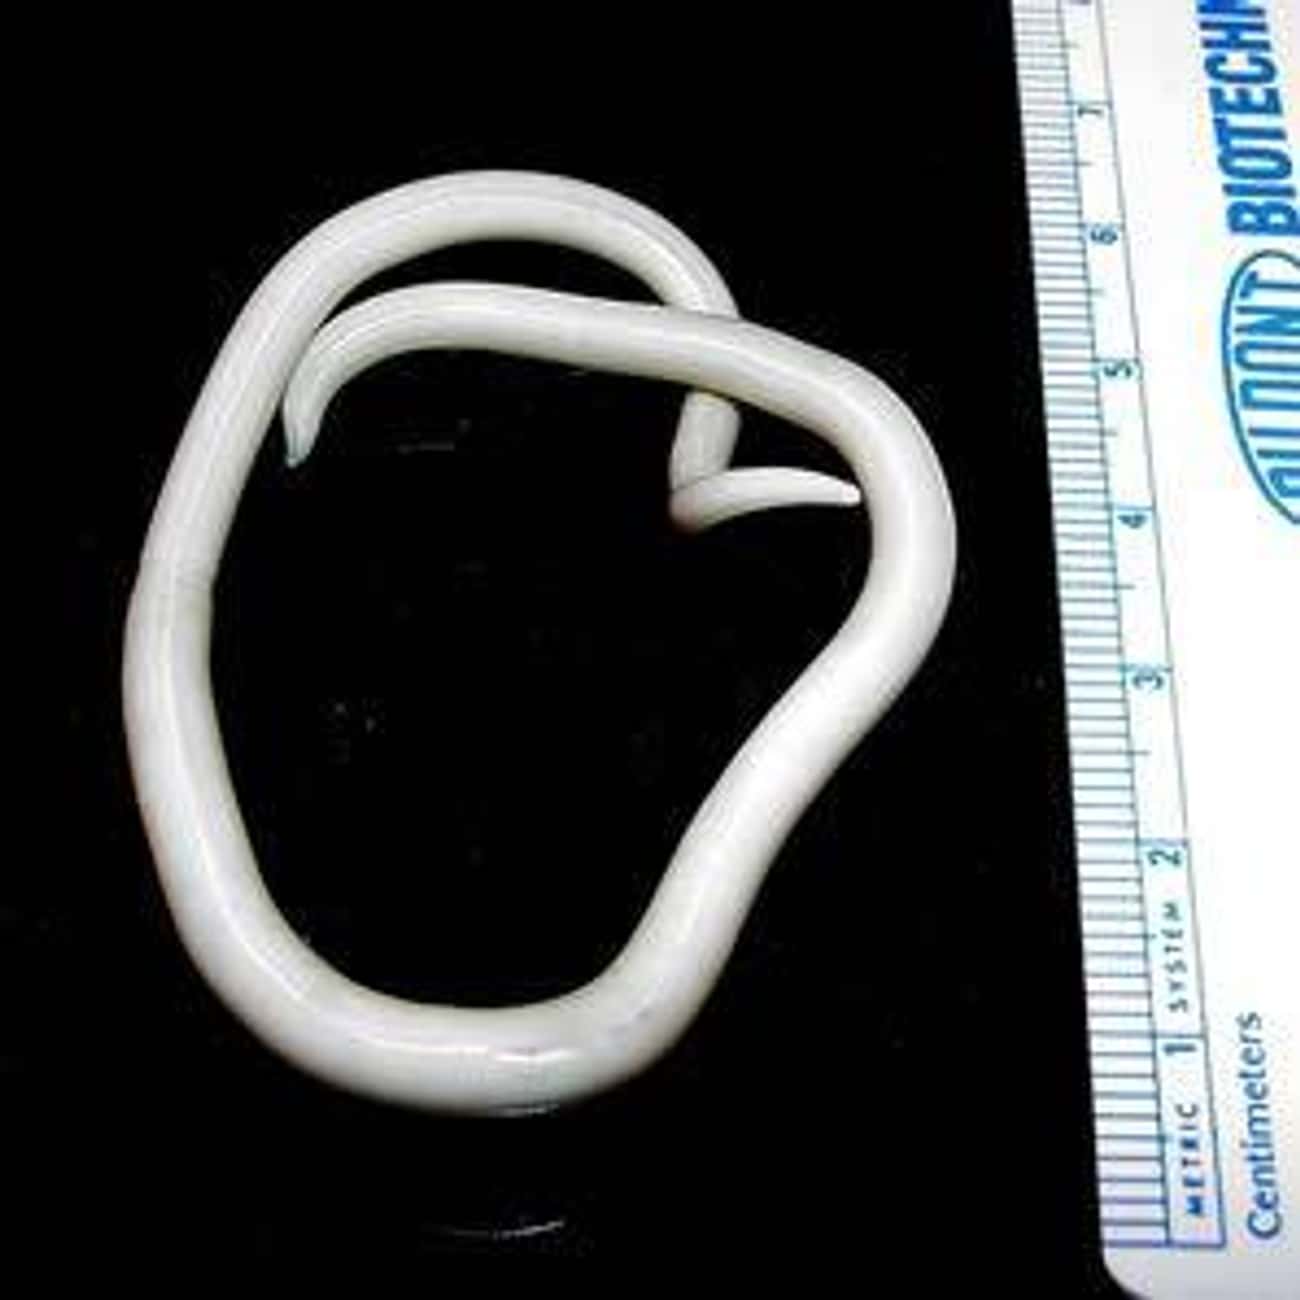 There Are Ways To Tell If You Have A Roundworm Infection